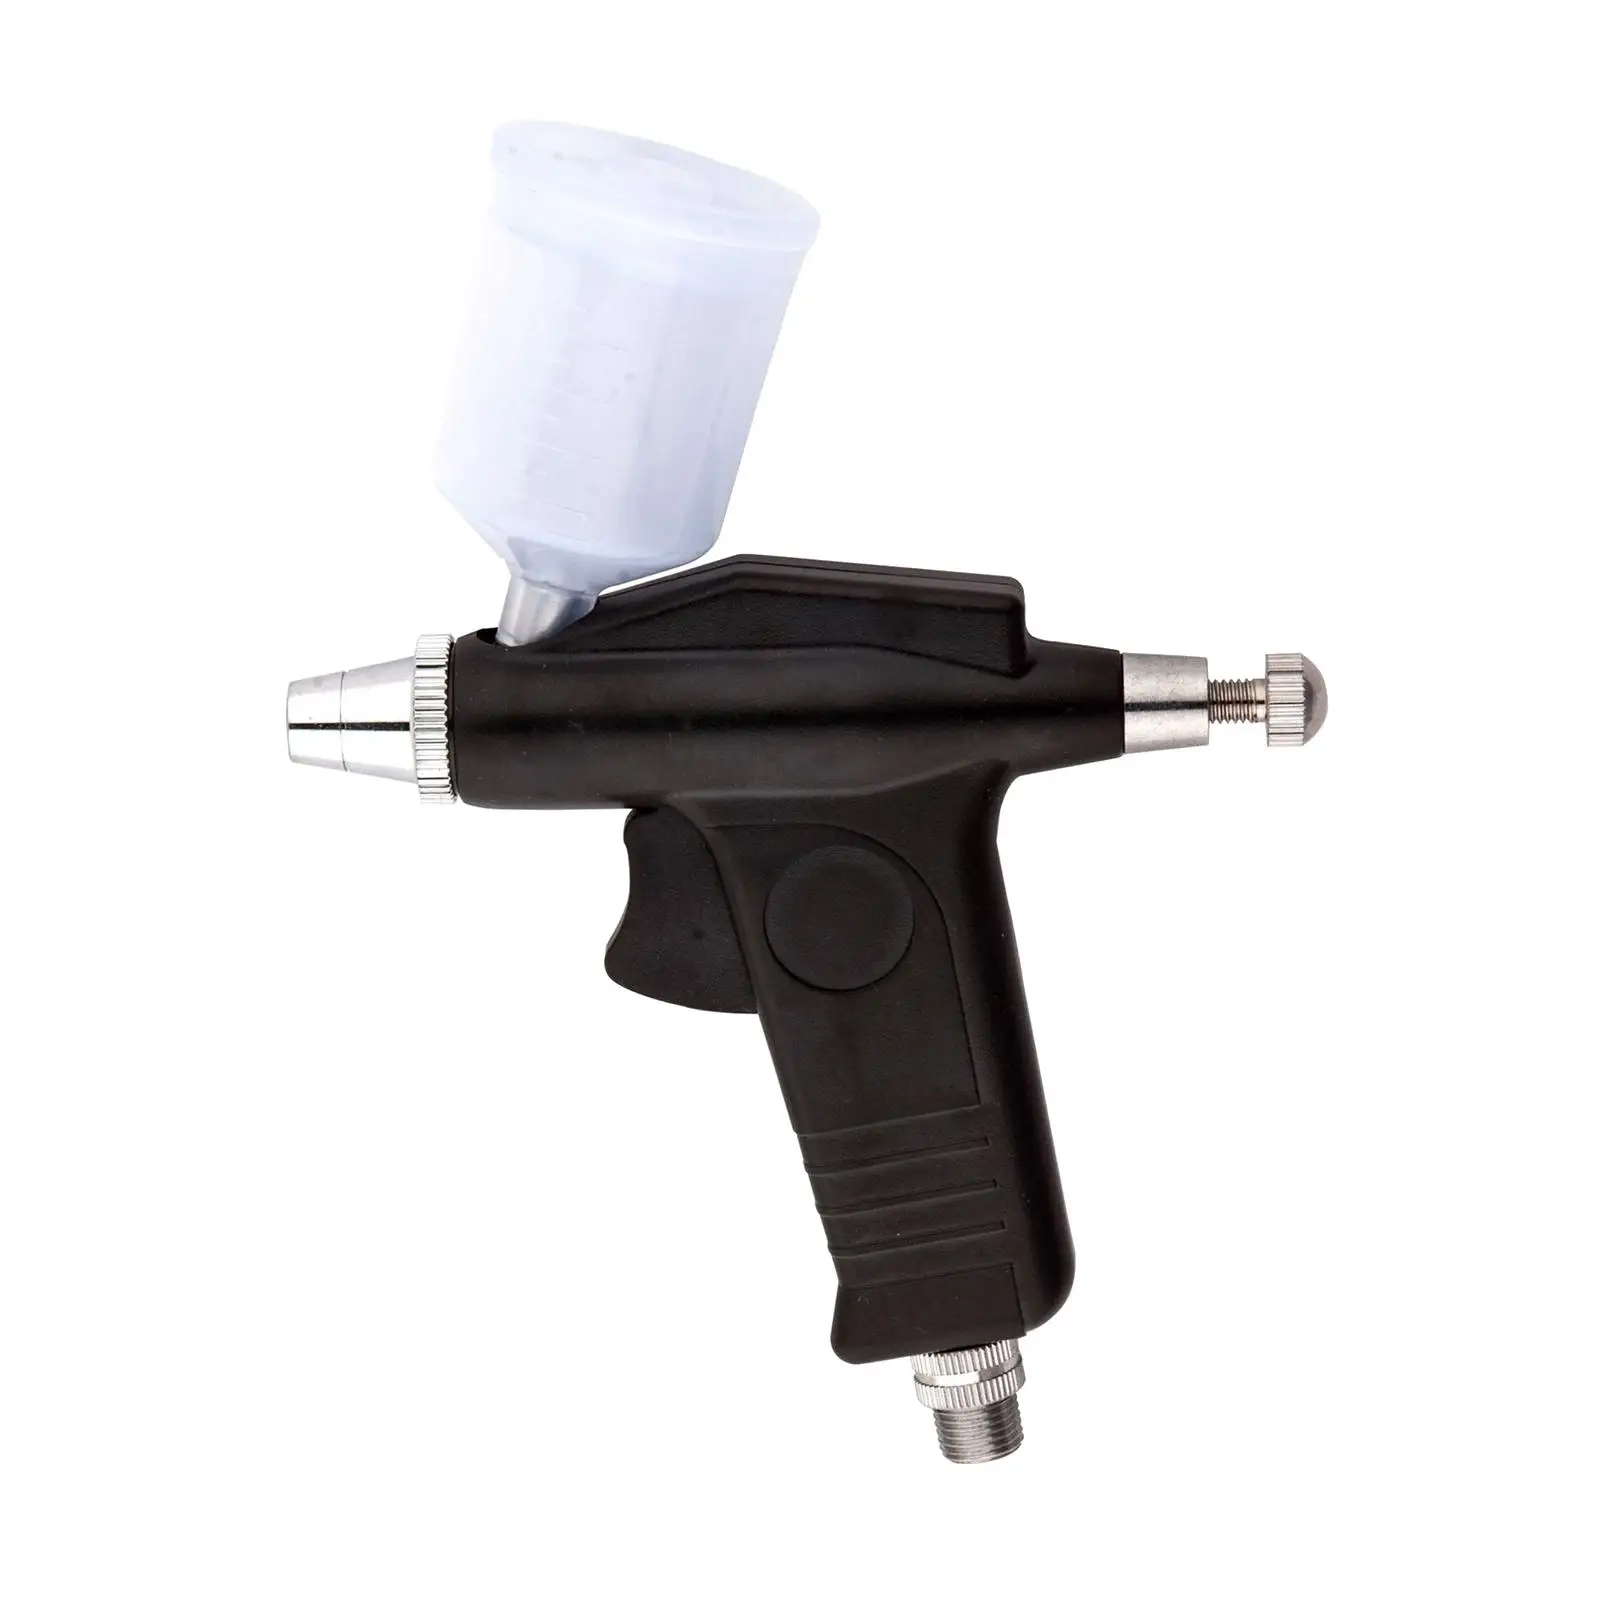 Airbrush Kit Single Action Air Hose Paint Sprayer Painting Tool Spray Gun 0.3mm Nozzle Gravity feed for Cake Tattoo Body Paint